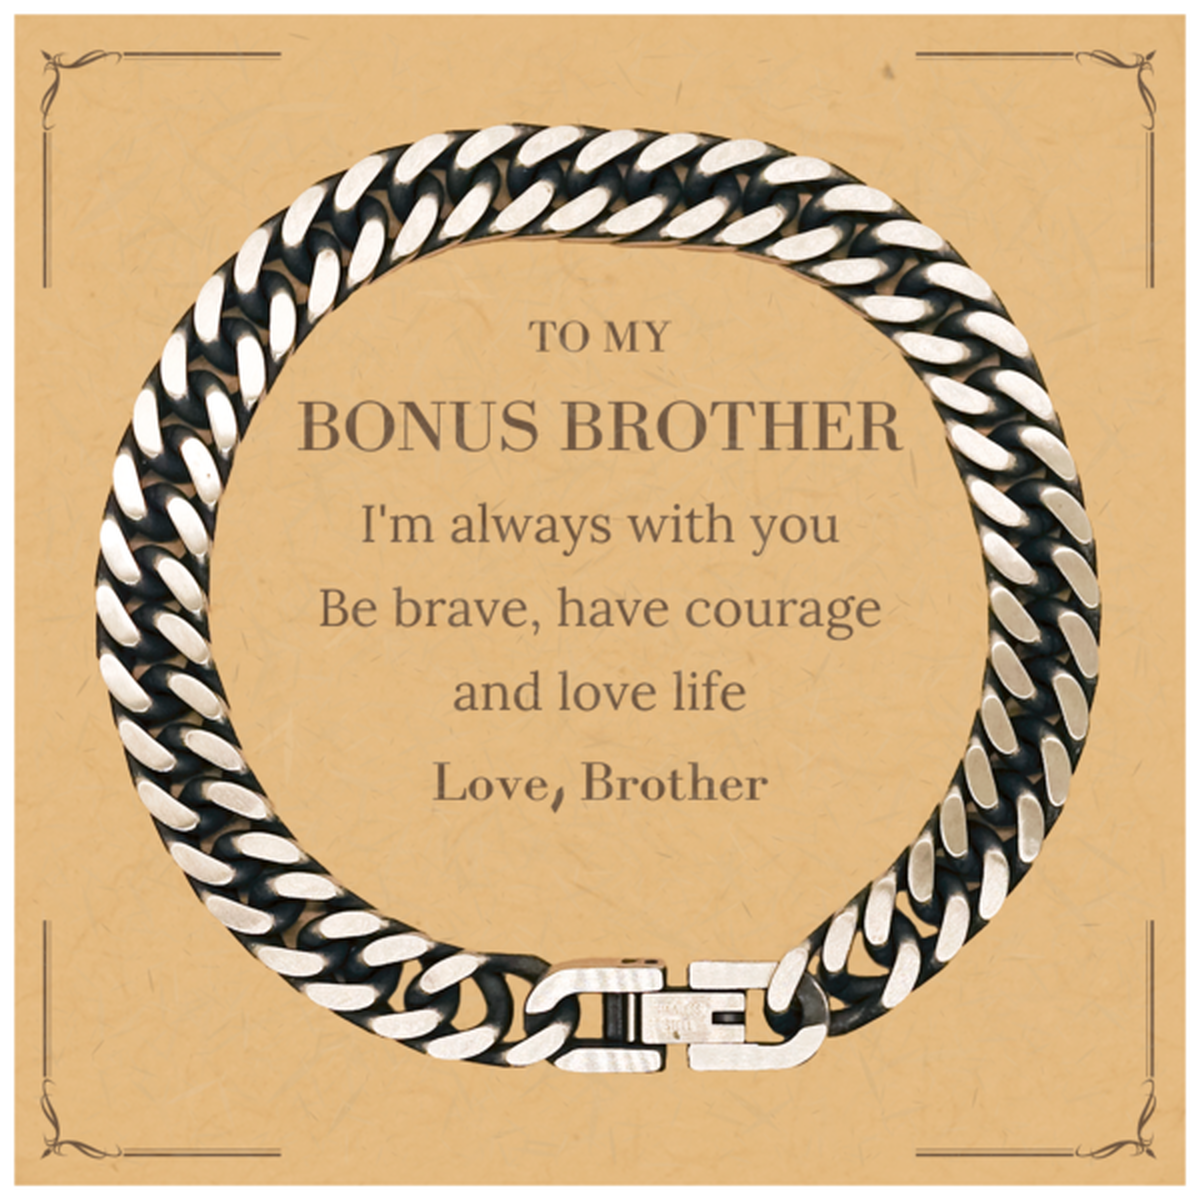 To My Bonus Brother Gifts from Brother, Unique Cuban Link Chain Bracelet Inspirational Christmas Birthday Graduation Gifts for Bonus Brother I'm always with you. Be brave, have courage and love life. Love, Brother